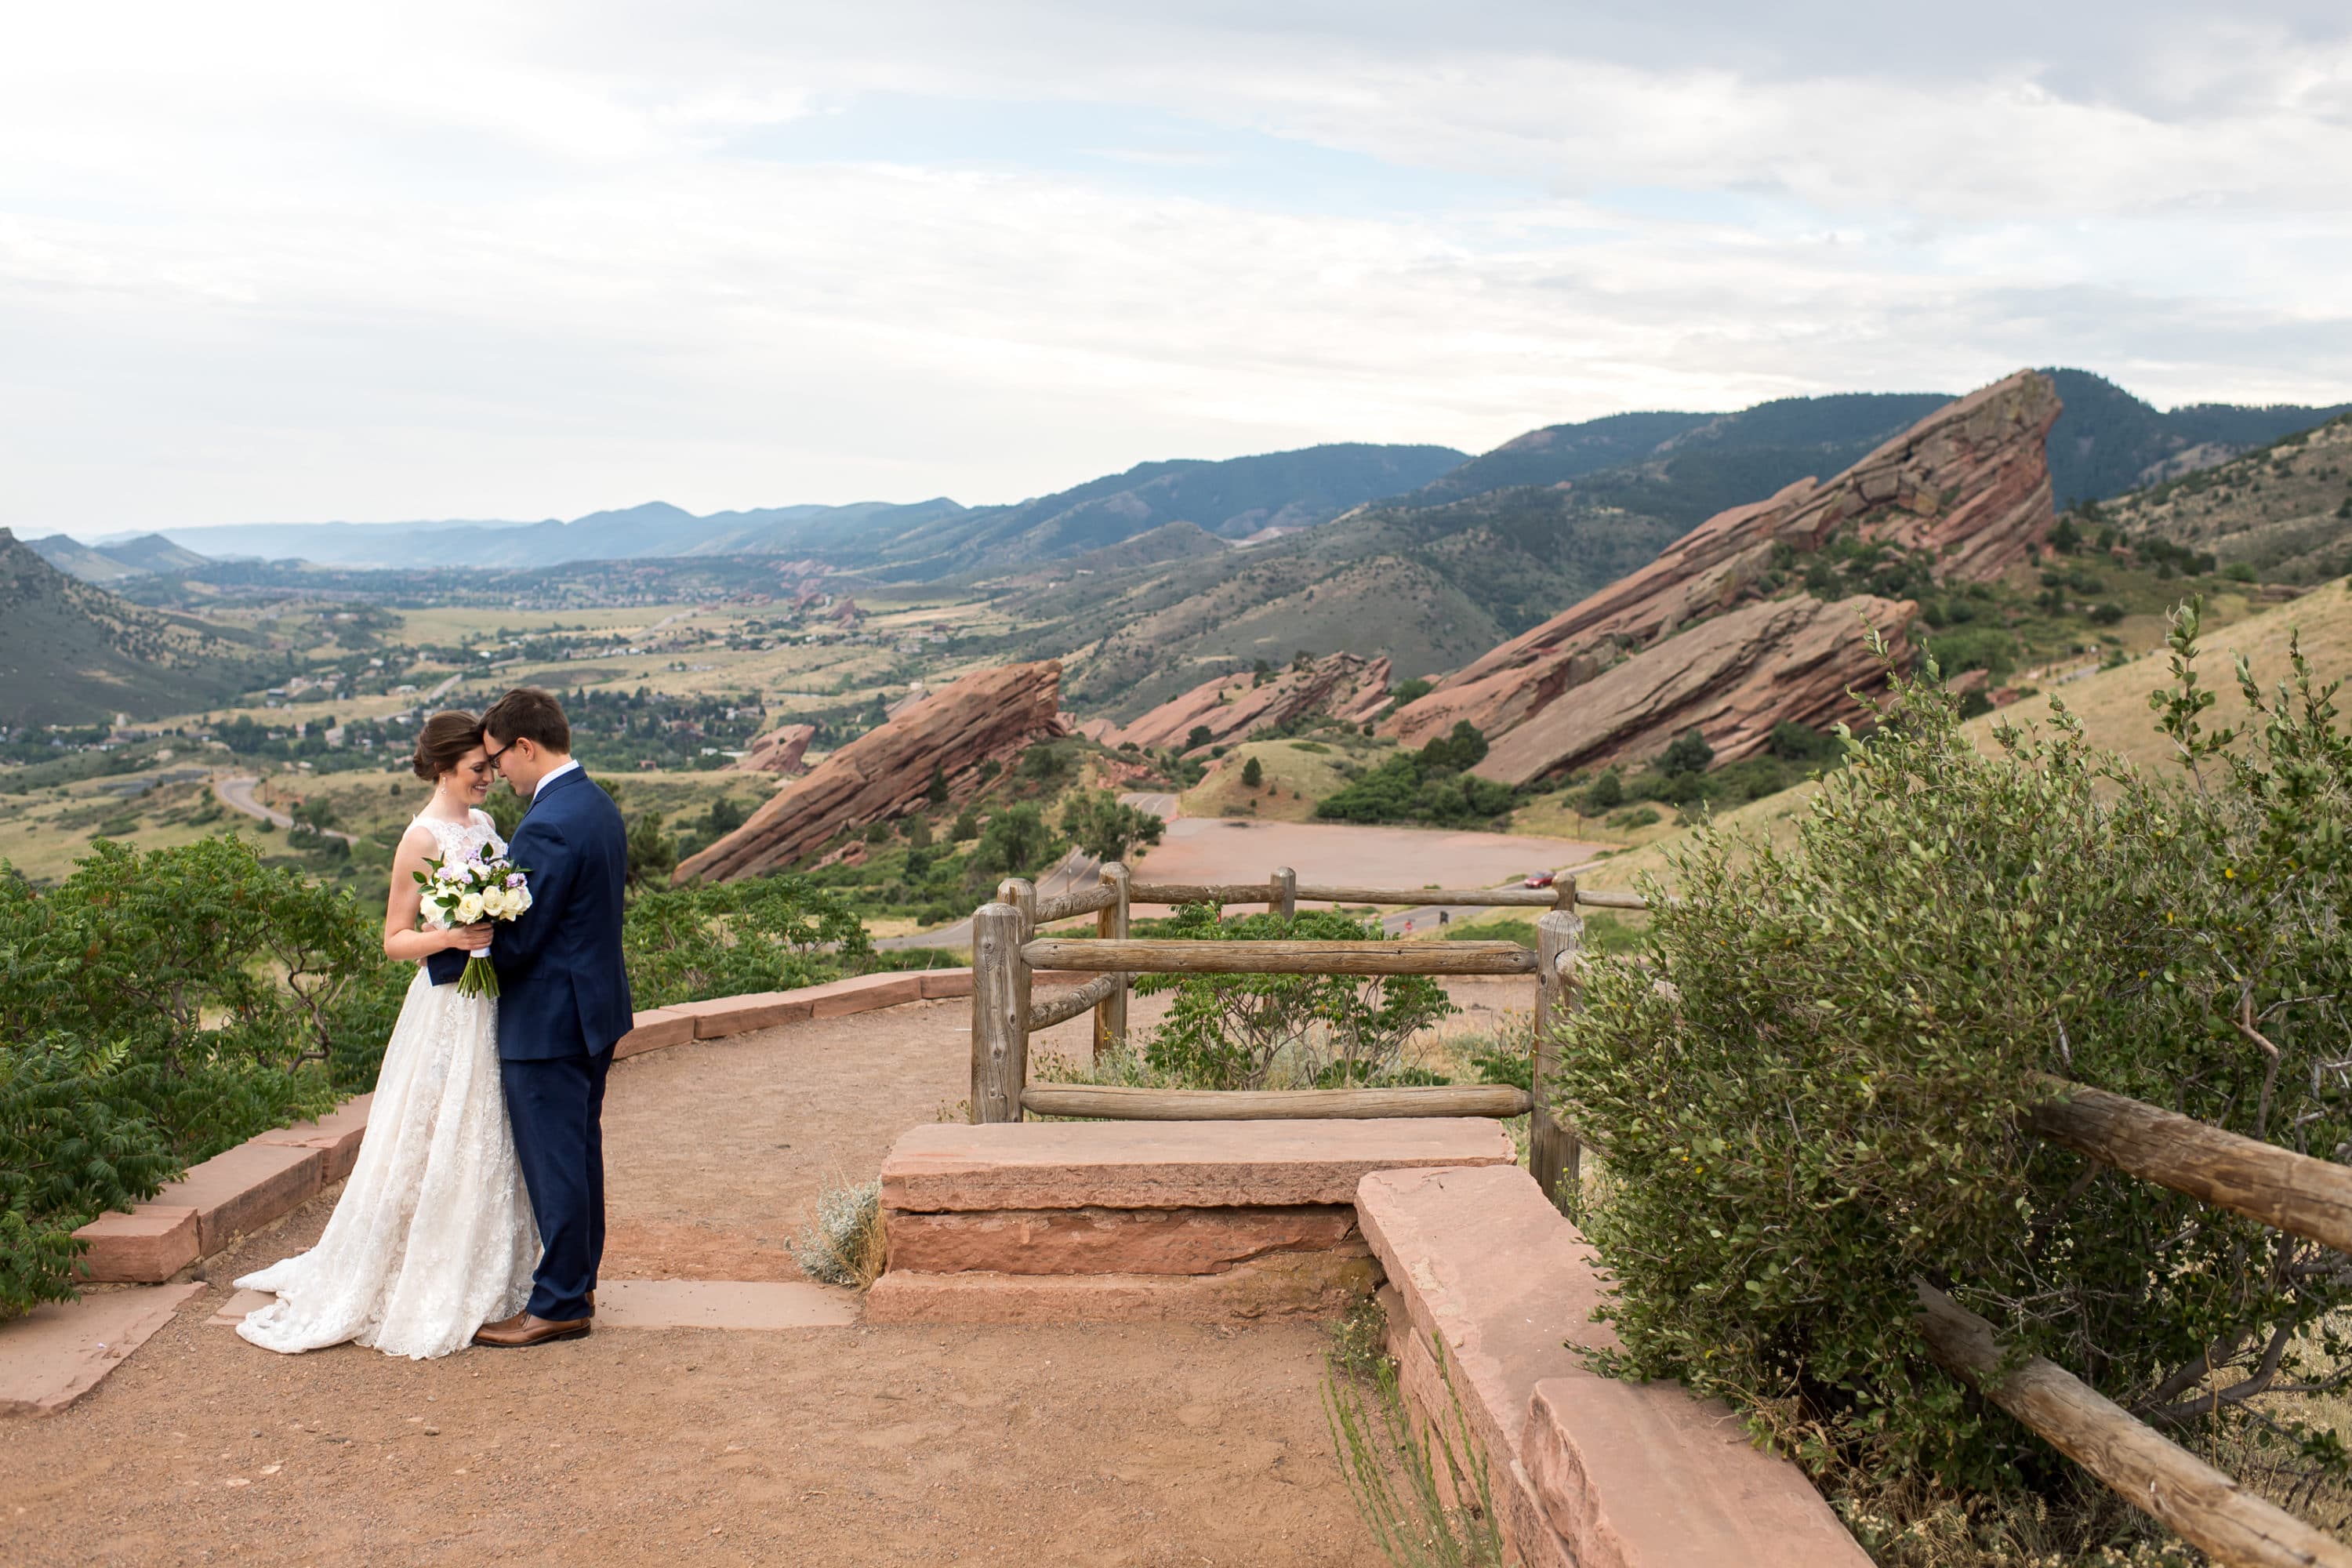 Red Rocks wedding photos at Red Rocks Park and Amphitheater in Denver, Colorado, with Stacy and Andrew.